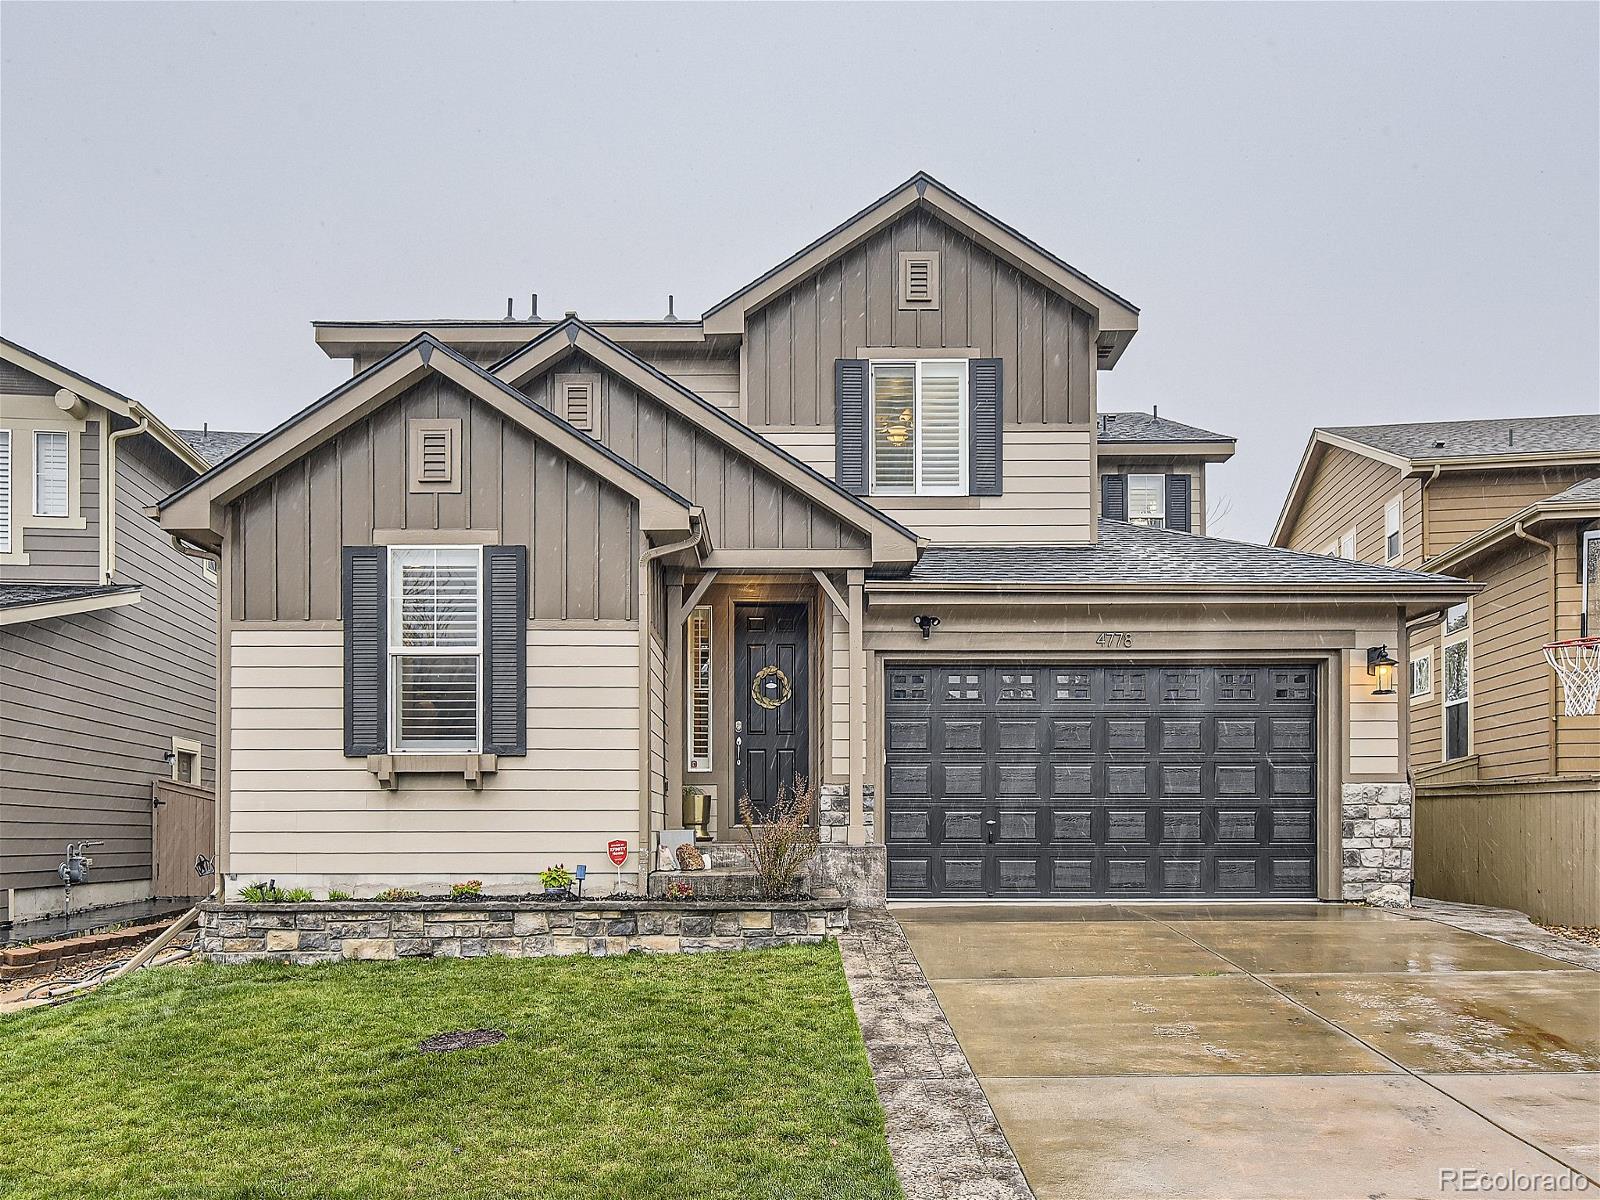 4778  bluegate drive, Highlands Ranch sold home. Closed on 2024-06-05 for $925,000.